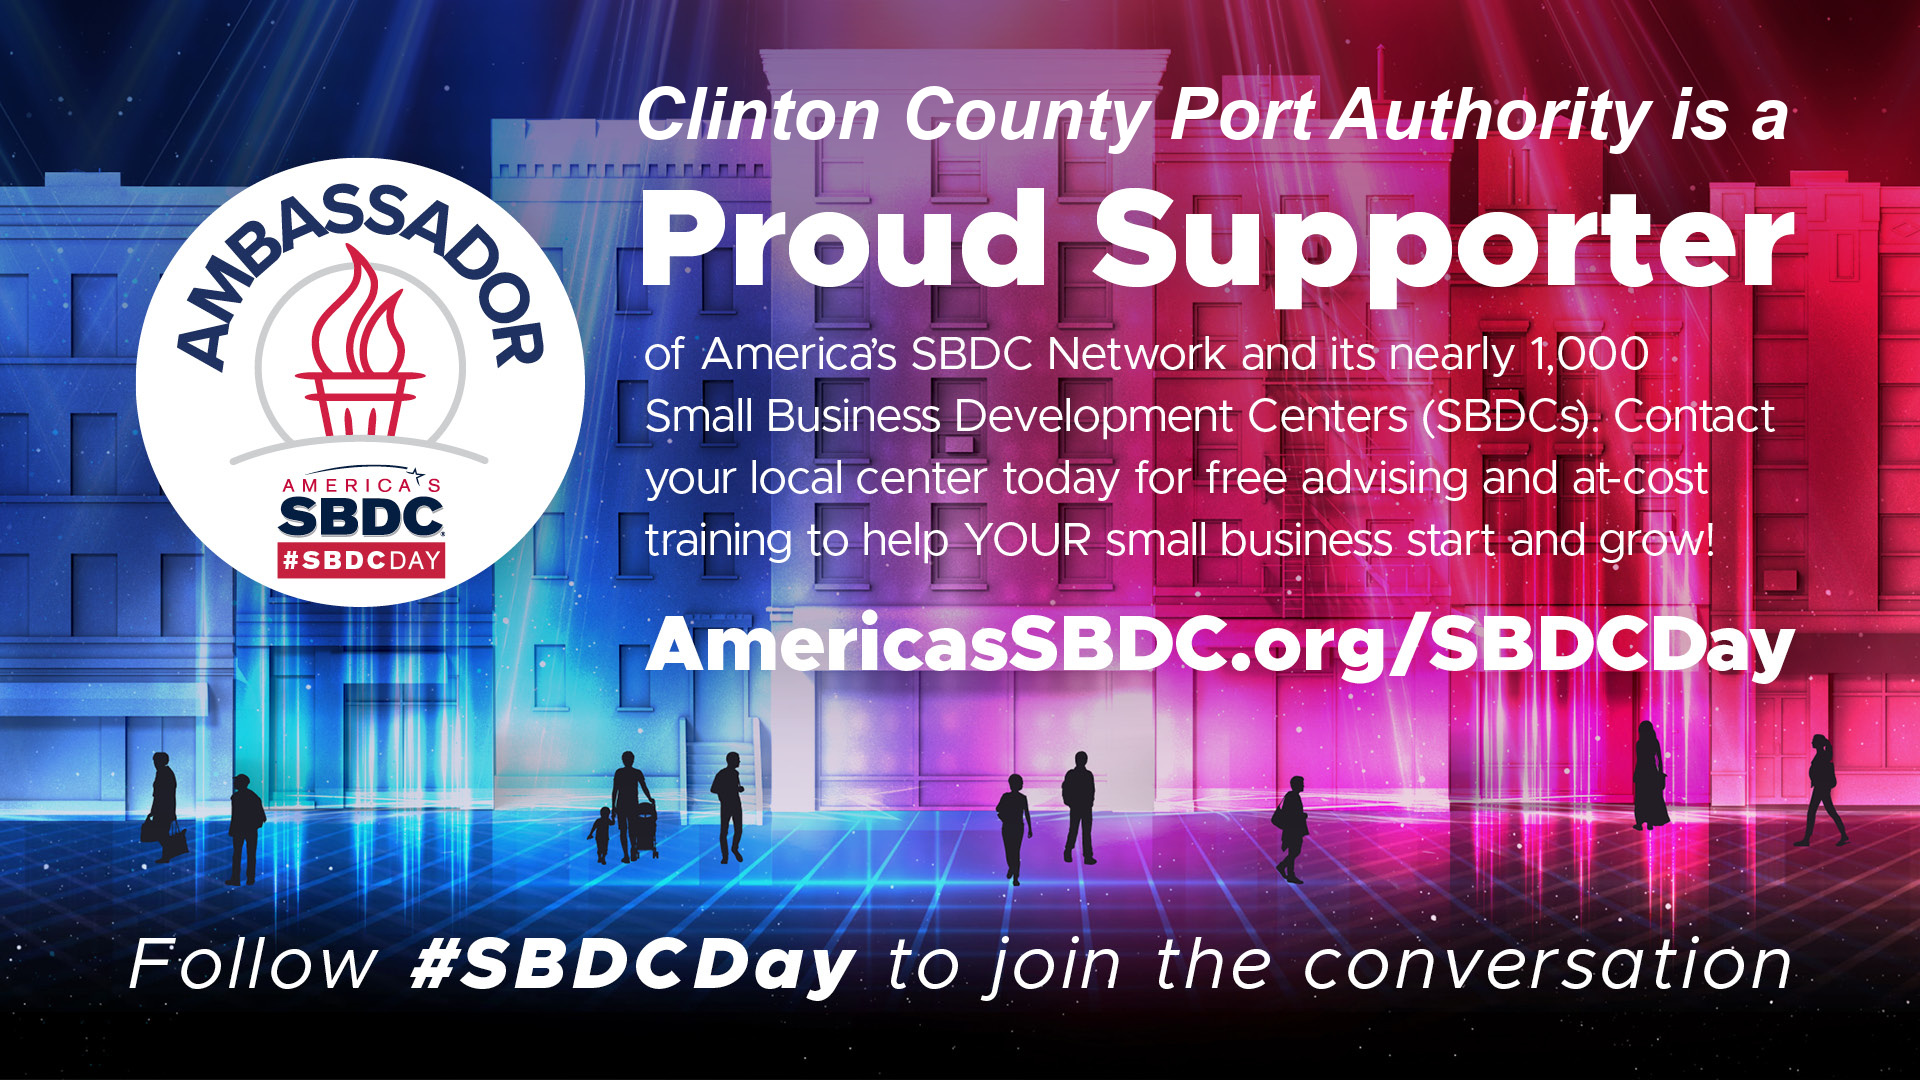 Clinton County Port Authority is Proud to be an SBDC Ambassador for a Third Year Main Photo